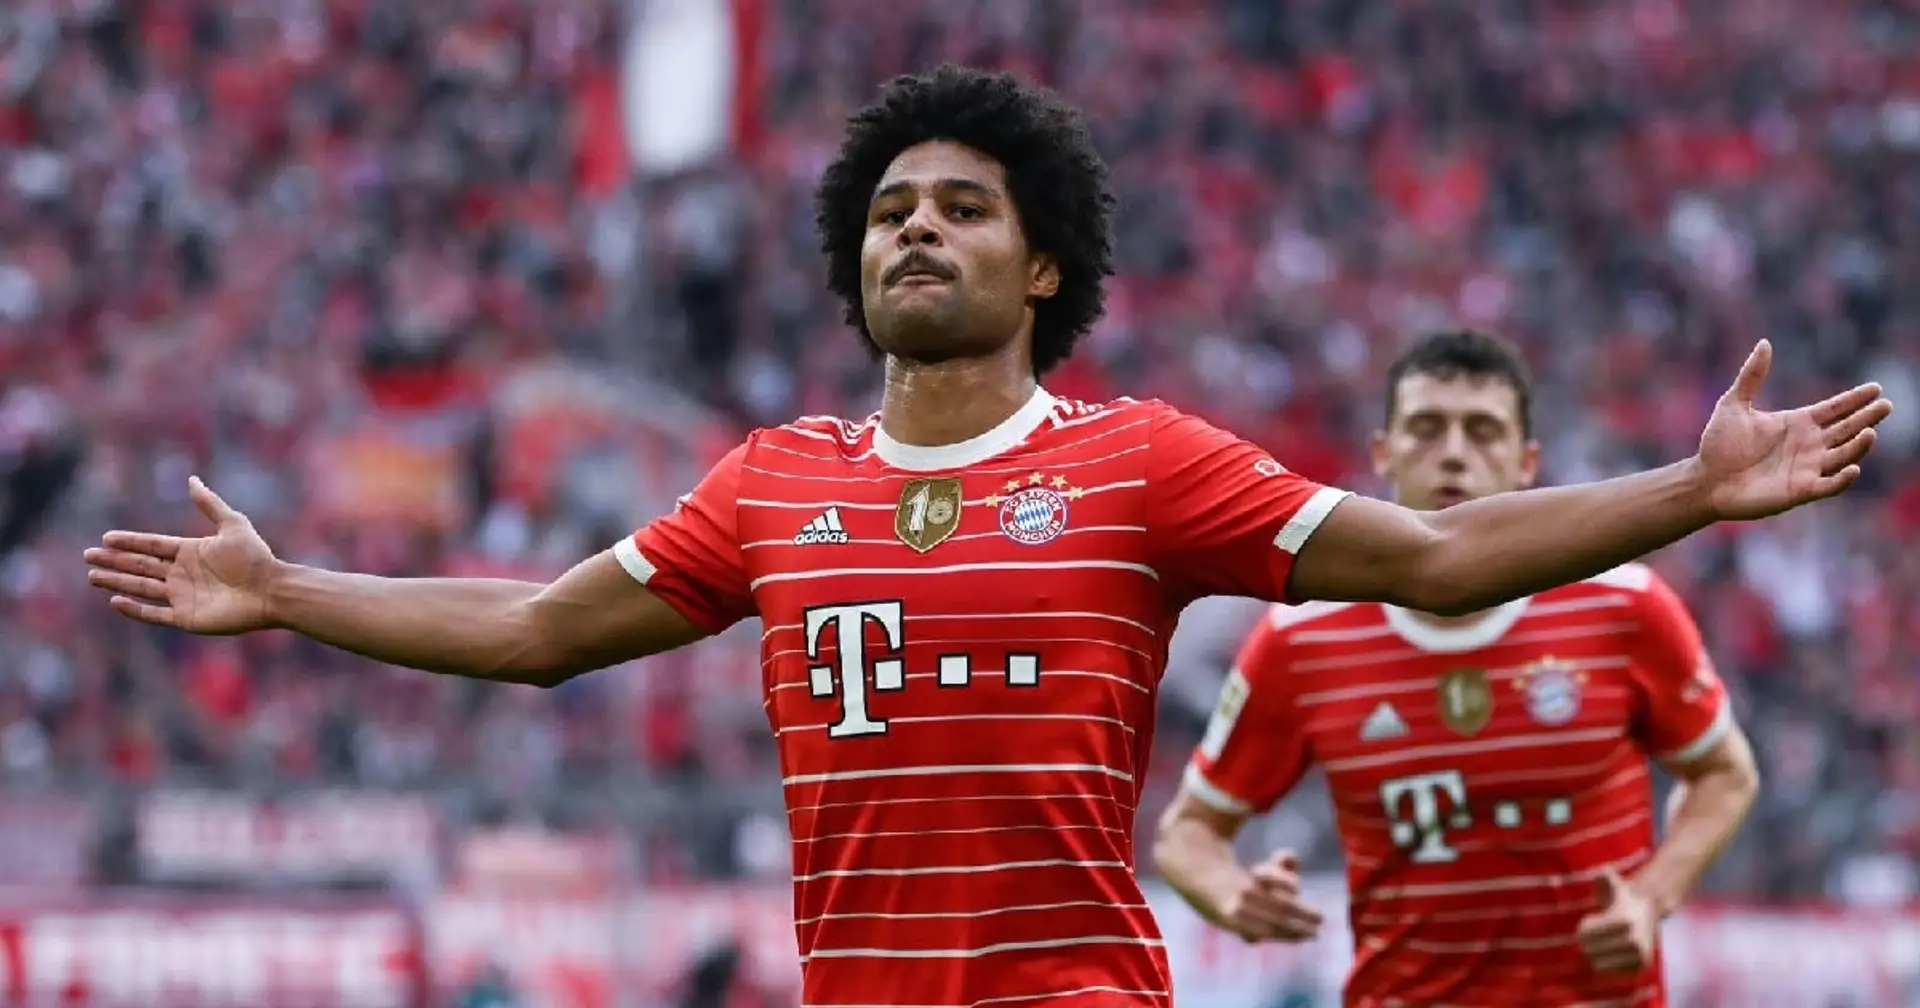 Gnabry giving priority to Bayern’s new contract proposal despite Chelsea approach: Romano